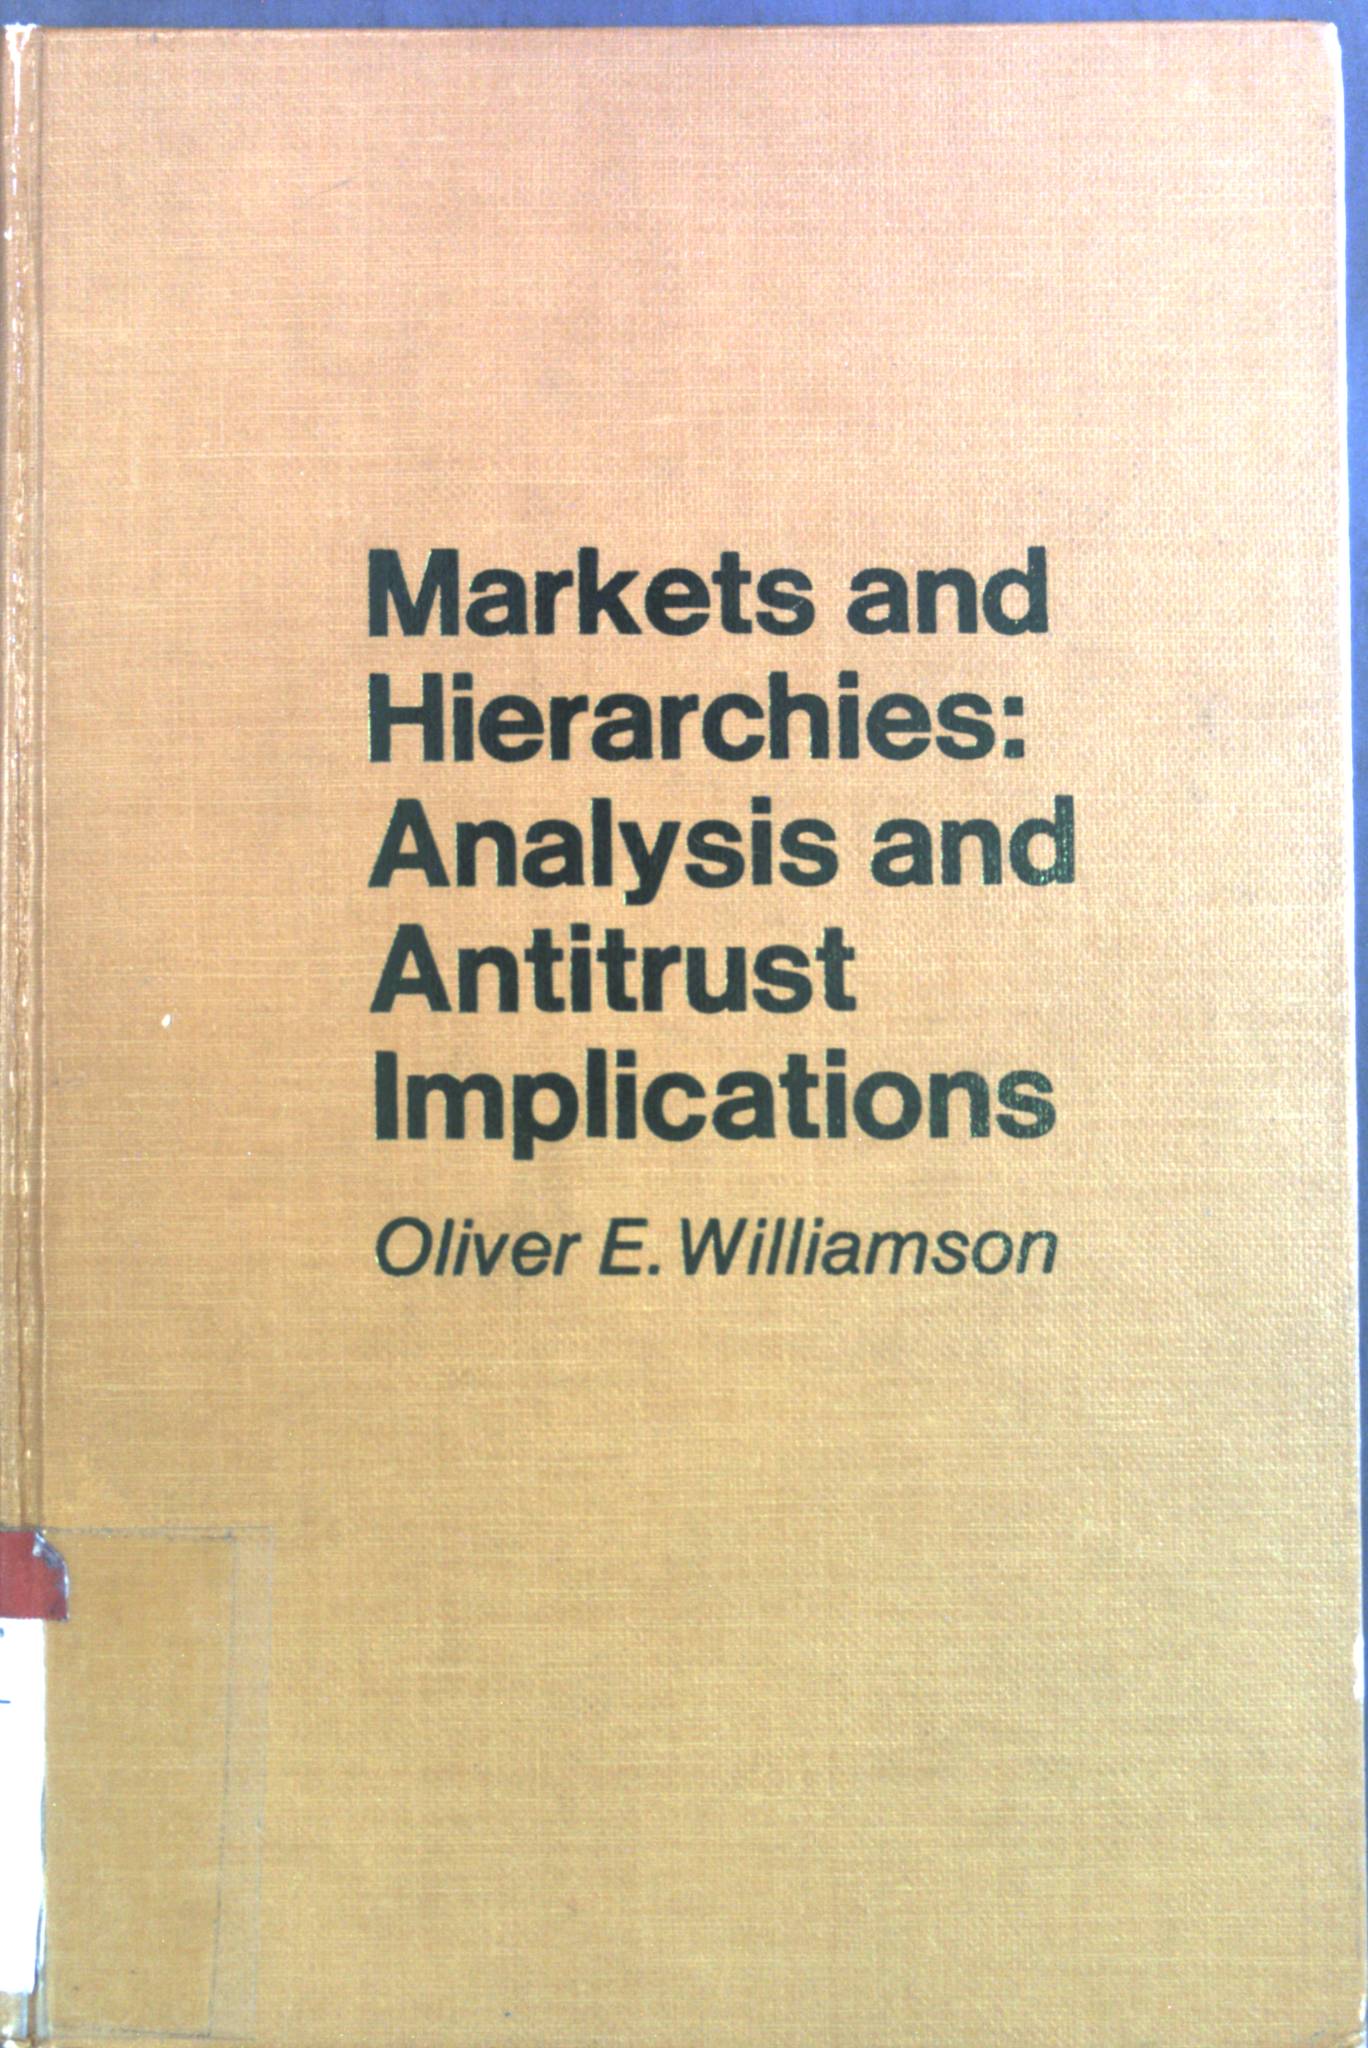 Markets and Hierarchies, Analysis and Antitrust Implications - Williamson, Oliver E.